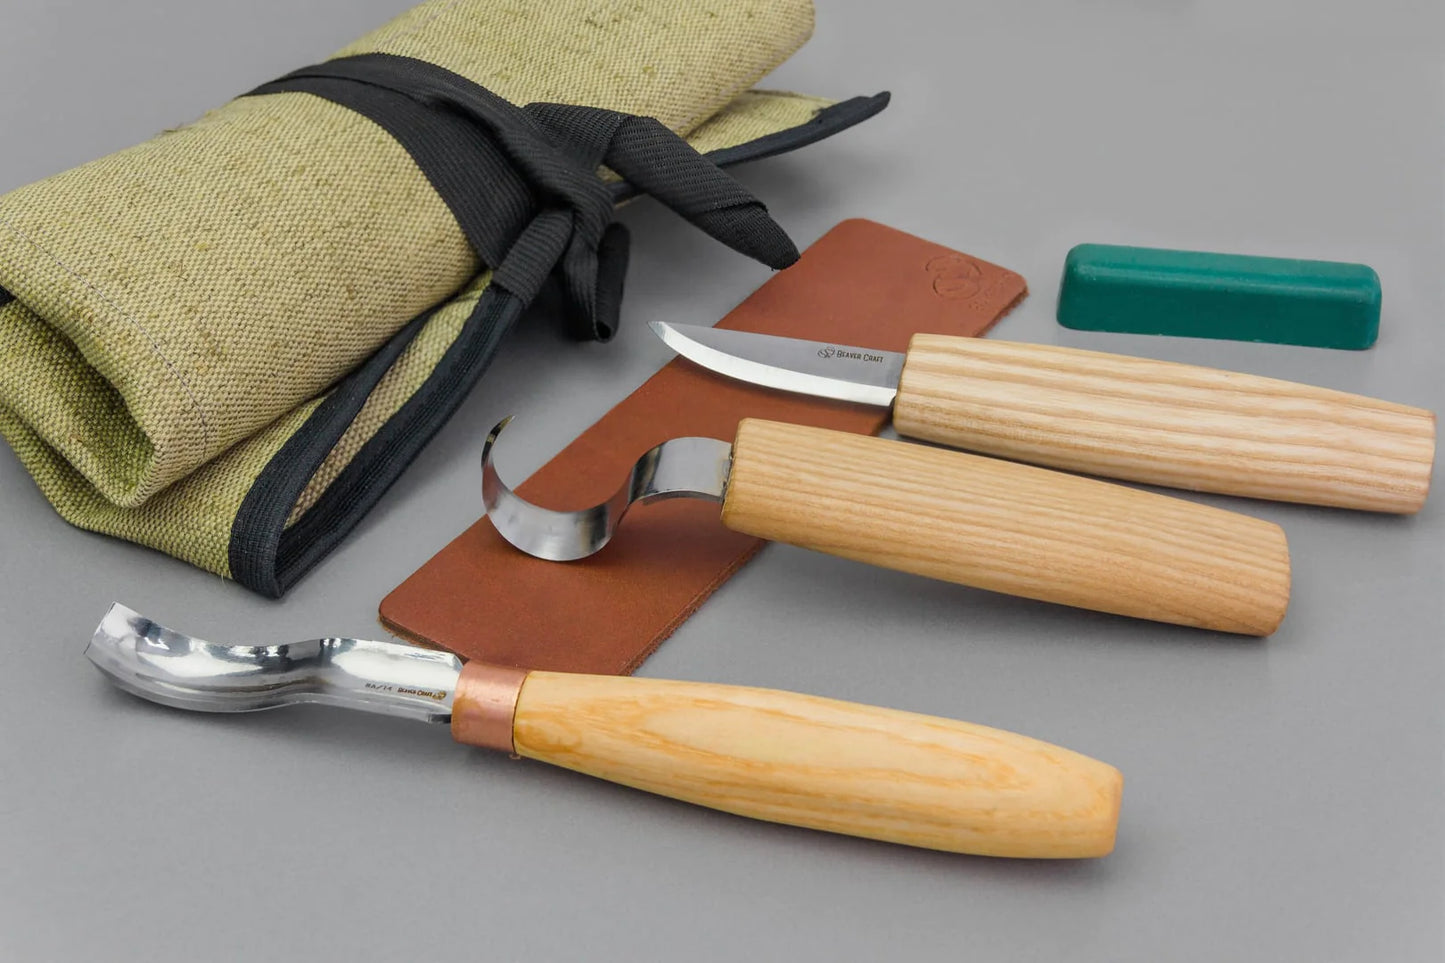 BeaverCraft S38 - Spoon Carving Kit Wood Carving Tools with Leather Strop